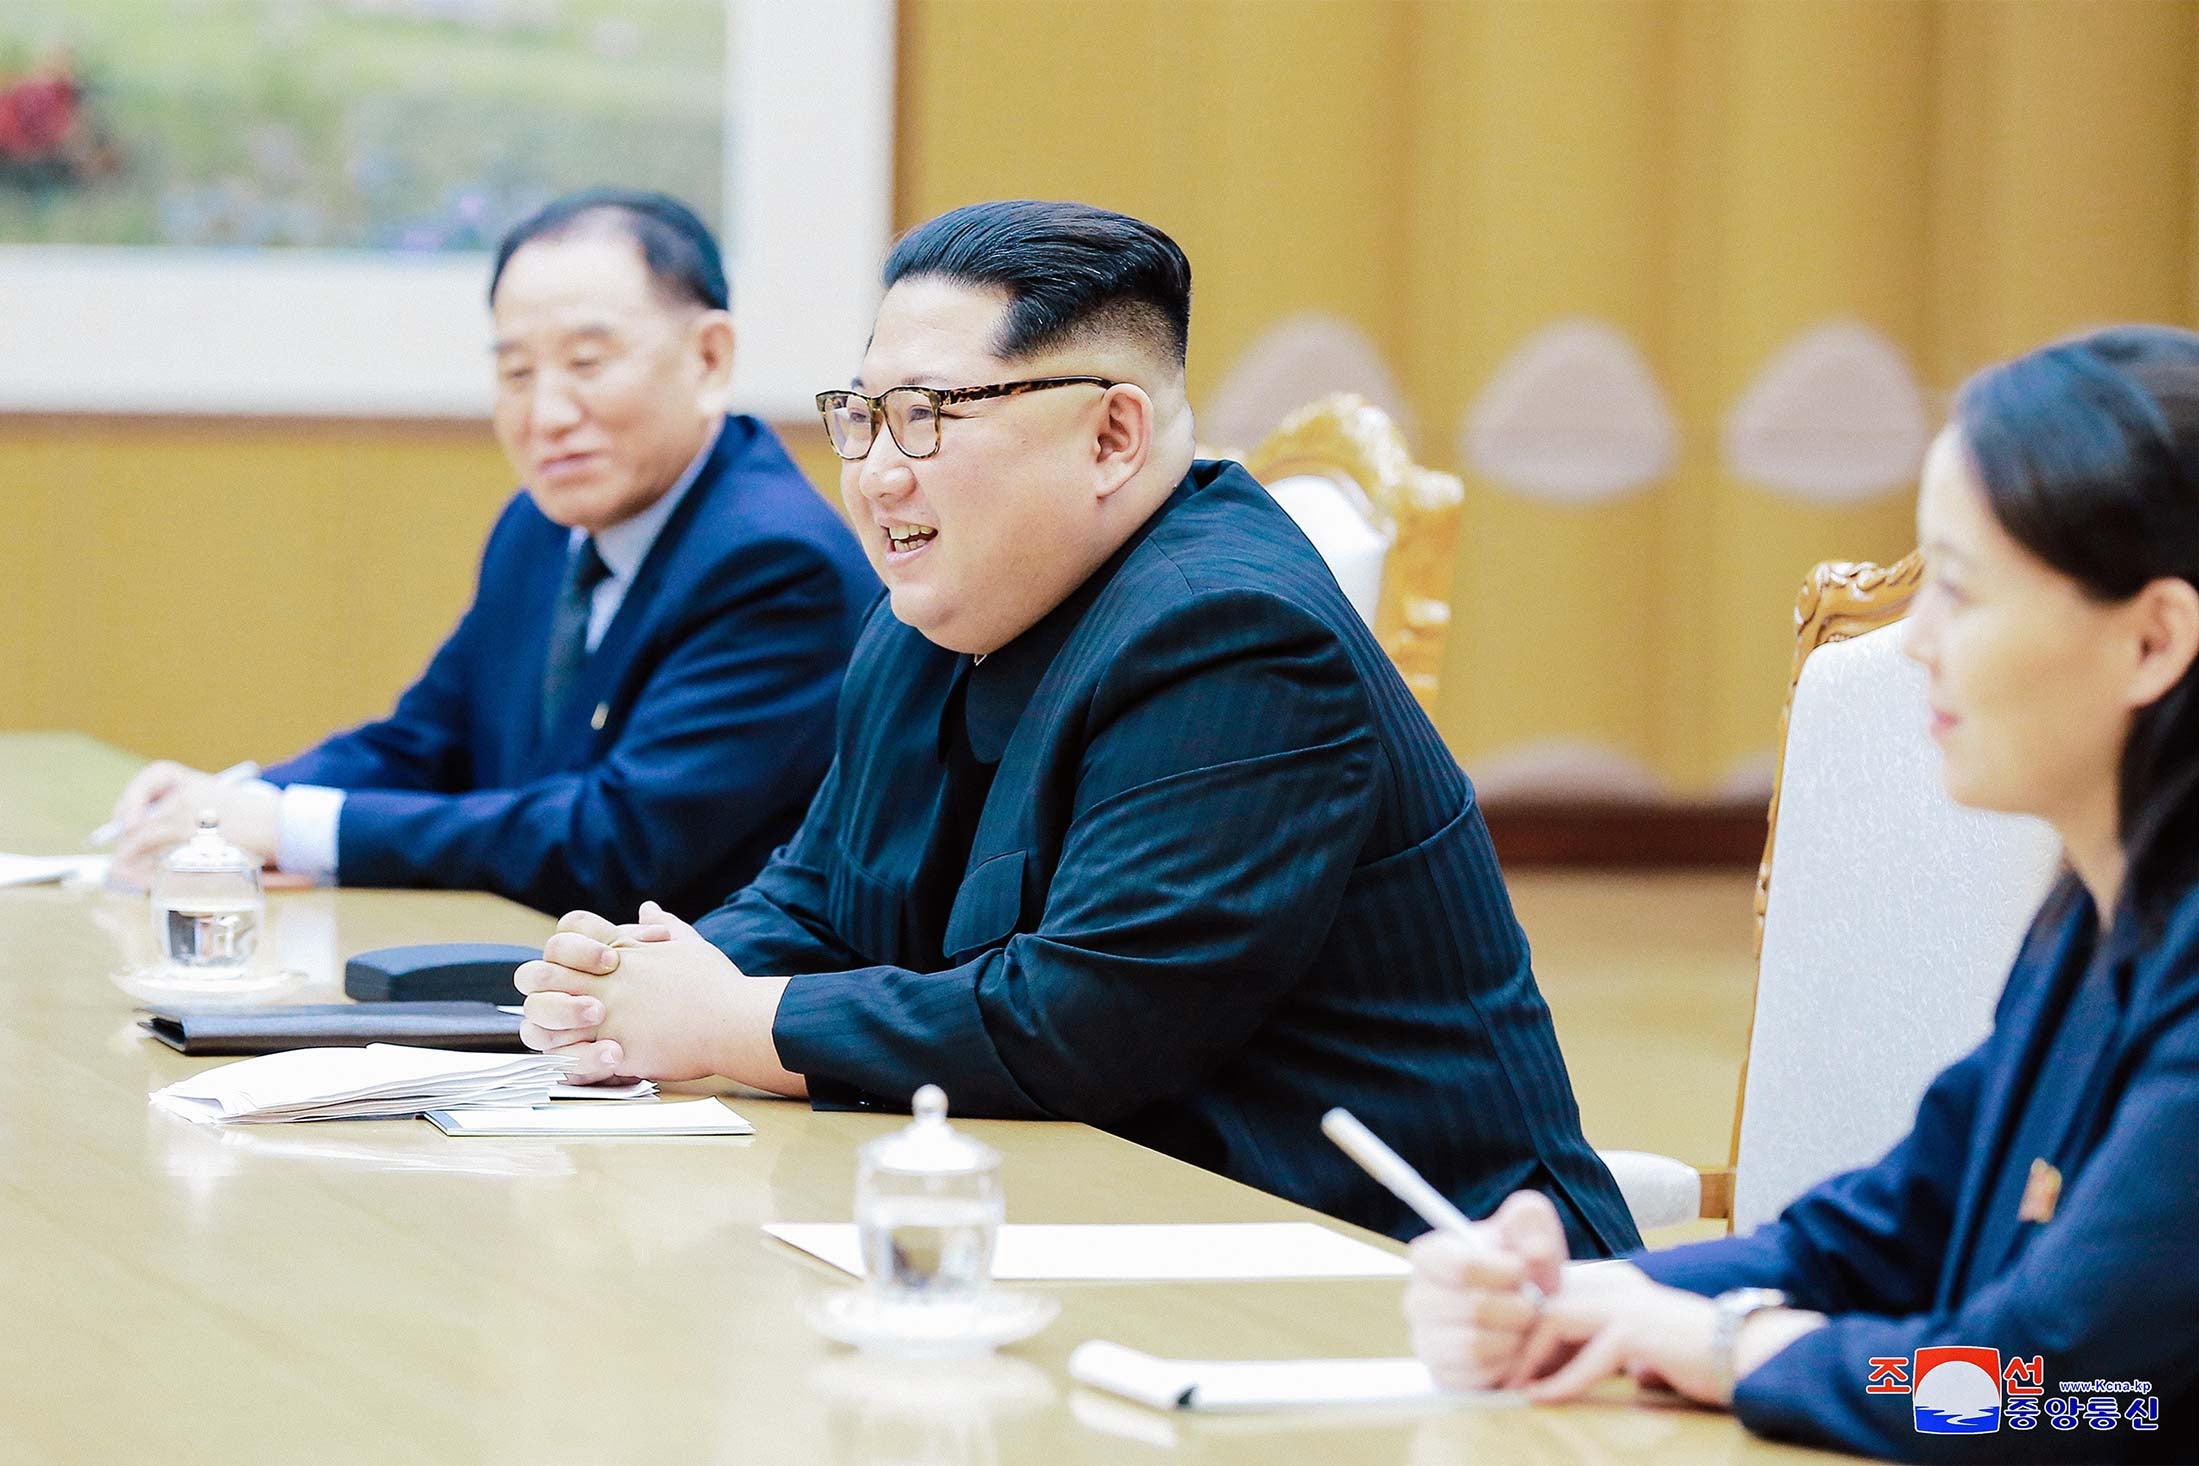 North Korean leader Kim Jong-un meets members of the special delegation of South Korea’s president.